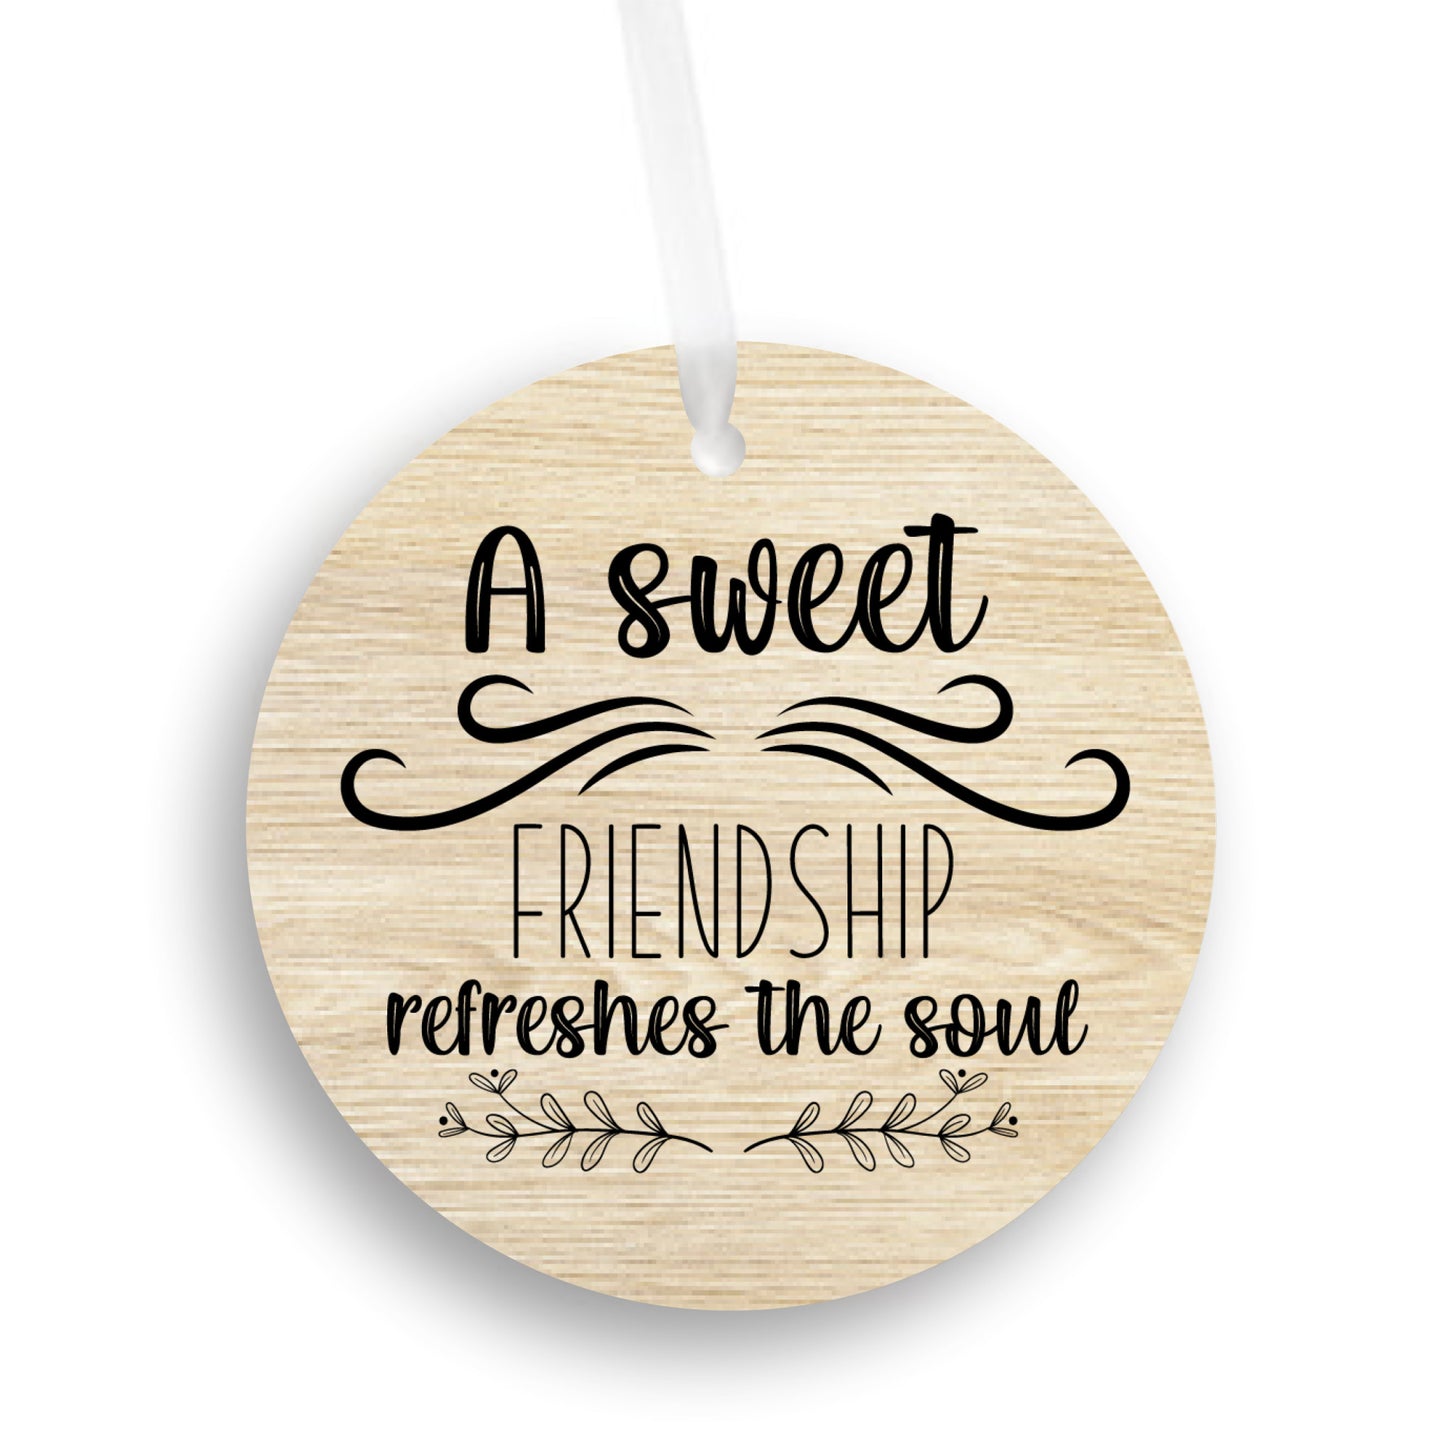 a sweet Friendship refreshes the Soul -ornament